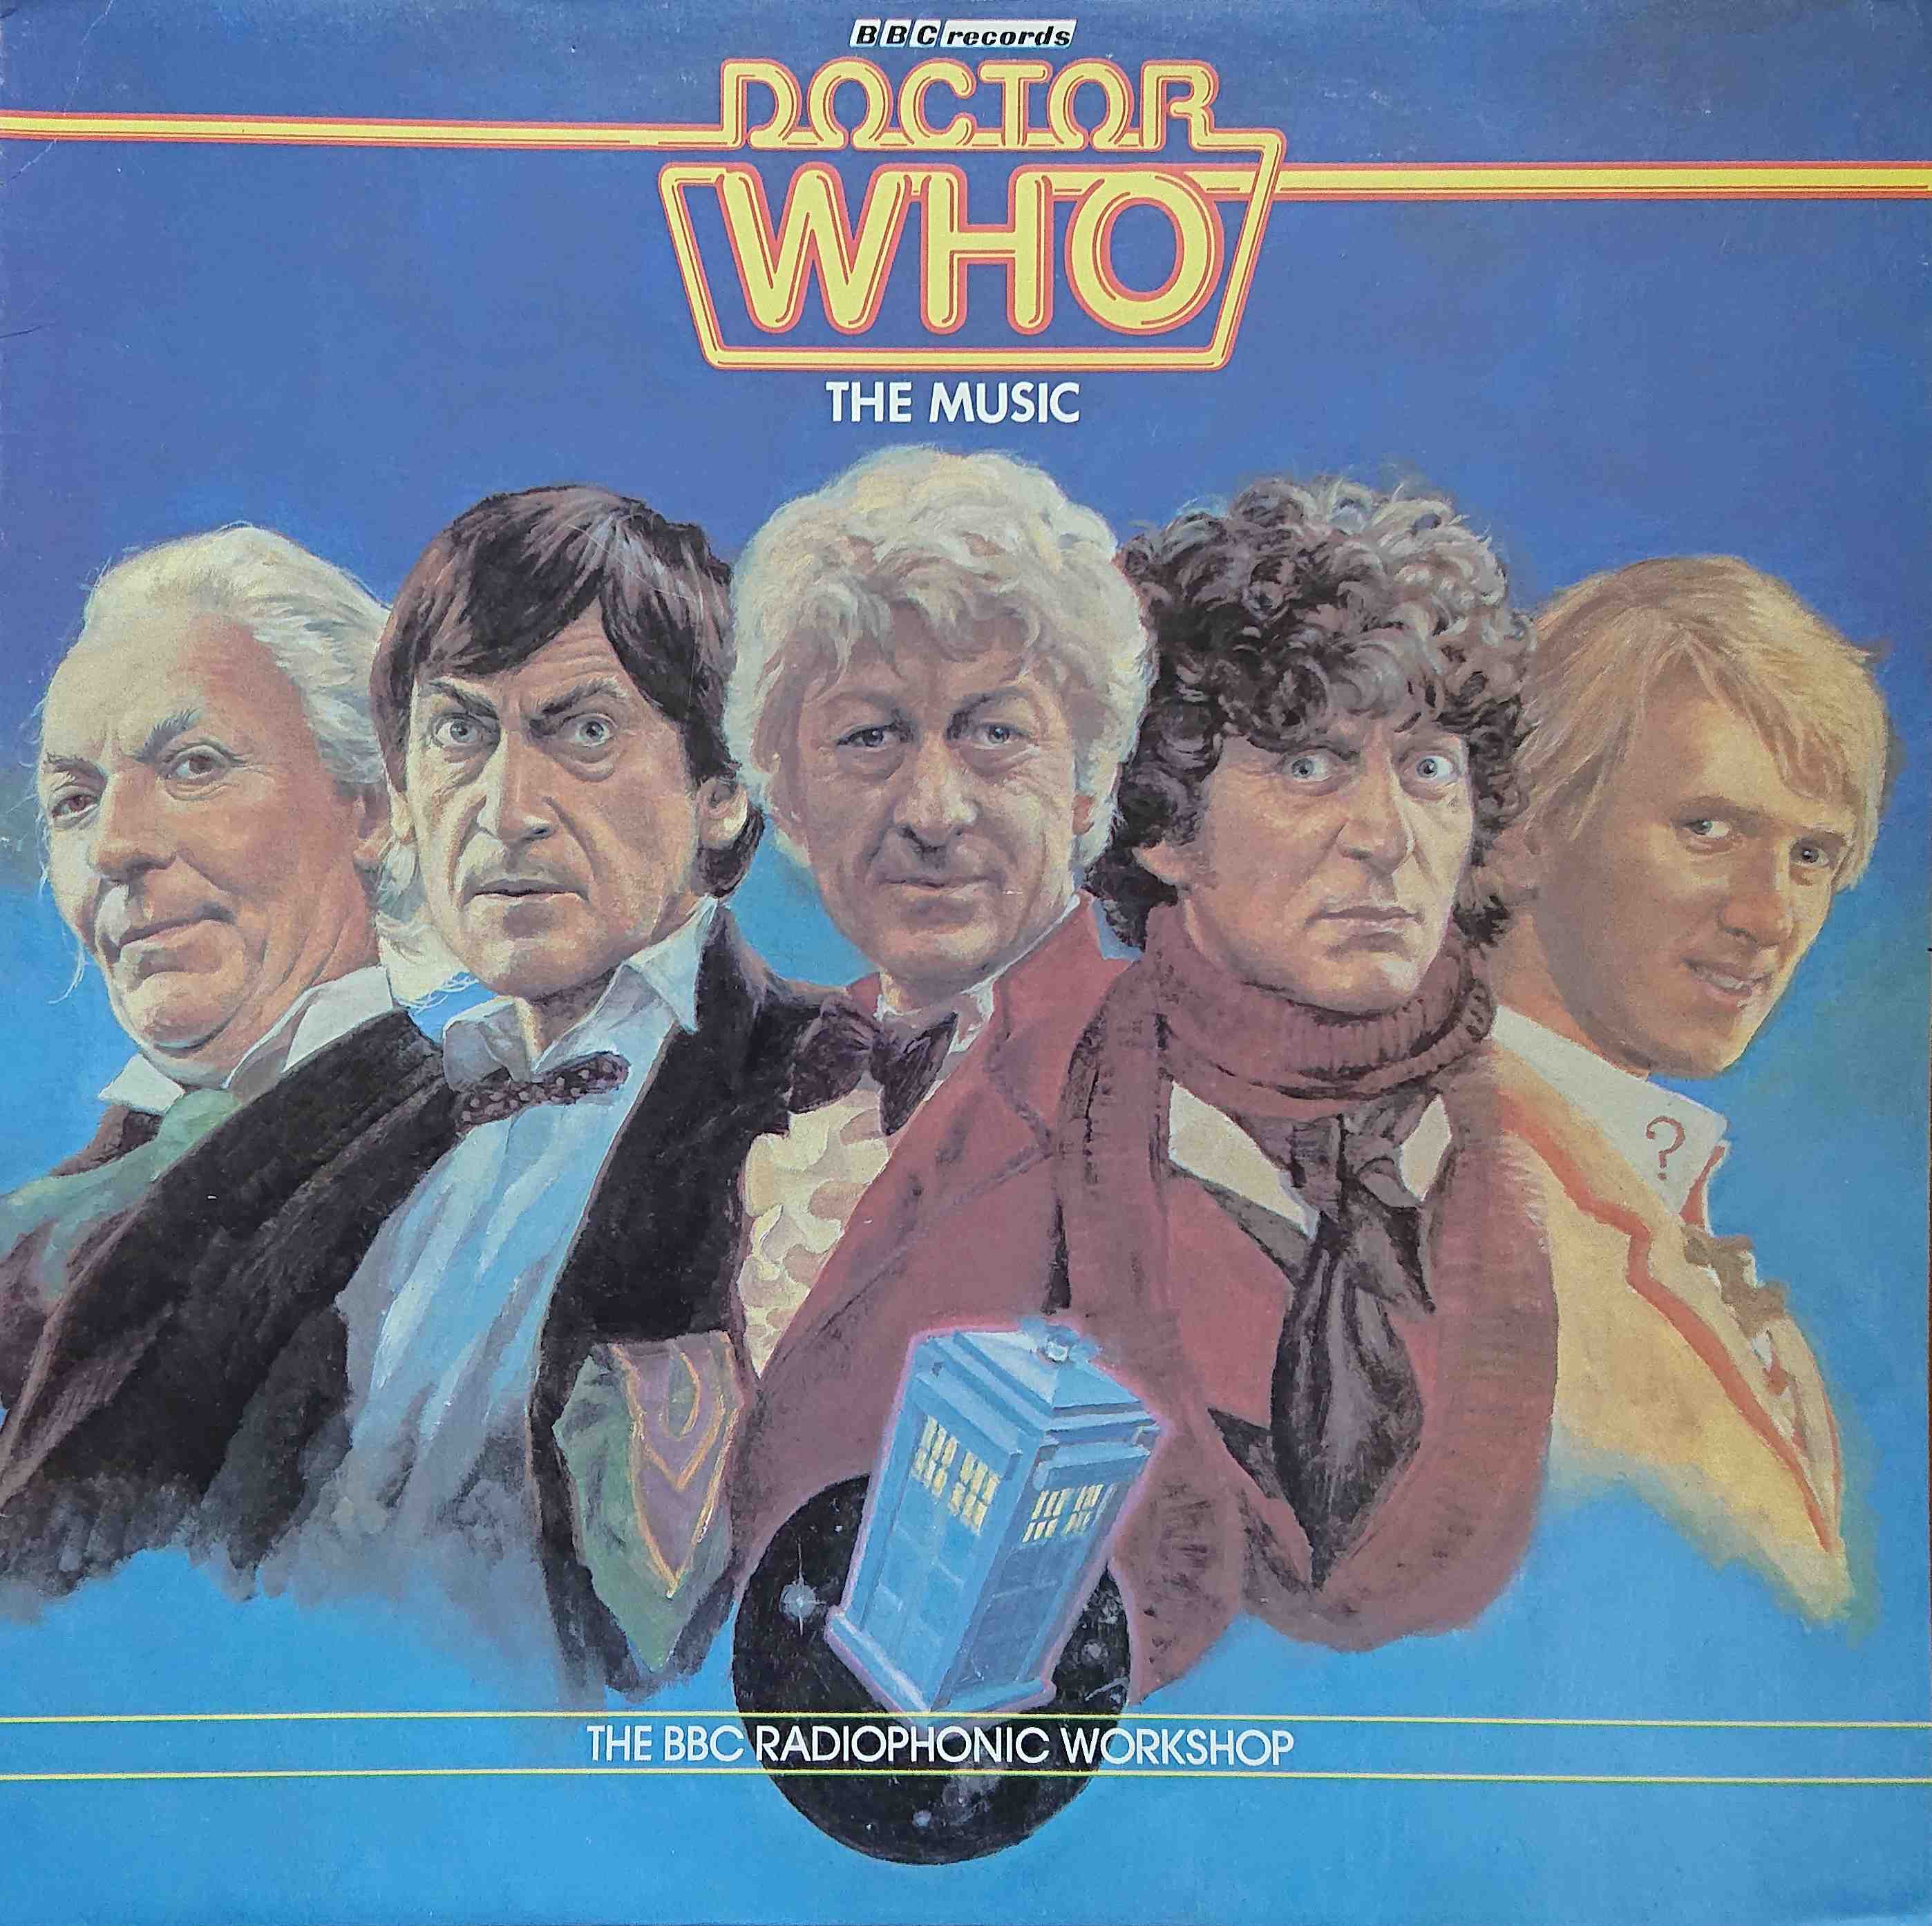 Picture of 811 933-1 Doctor Who - The music by artist Various from the BBC albums - Records and Tapes library